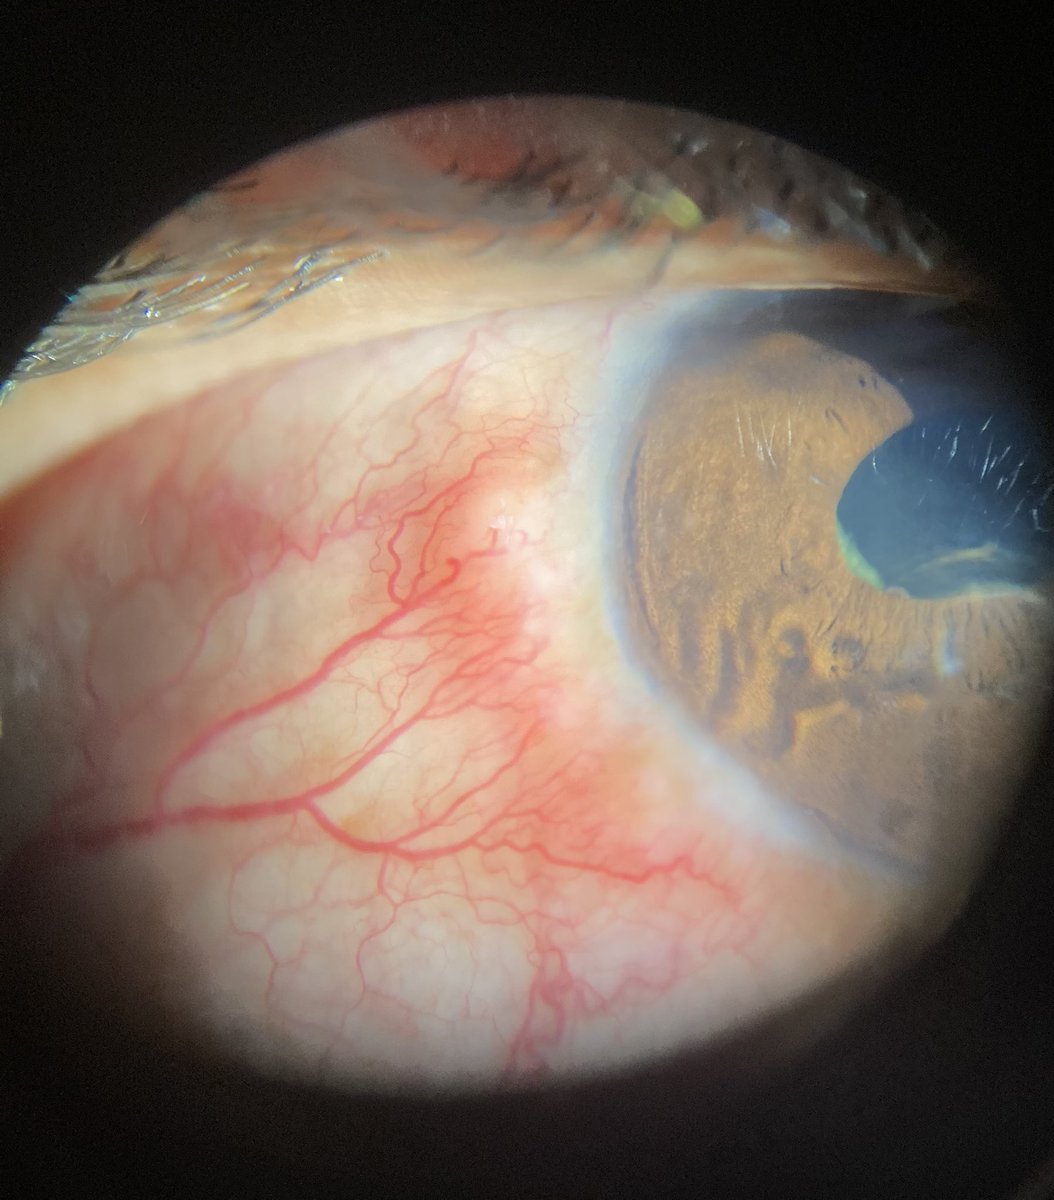 Steroid induced glaucoma presenting with inflammation every summer. 

Not tolerating cyclosporine. What next?

#MedTwitter #MedEd #Ophthalmology #glaucoma